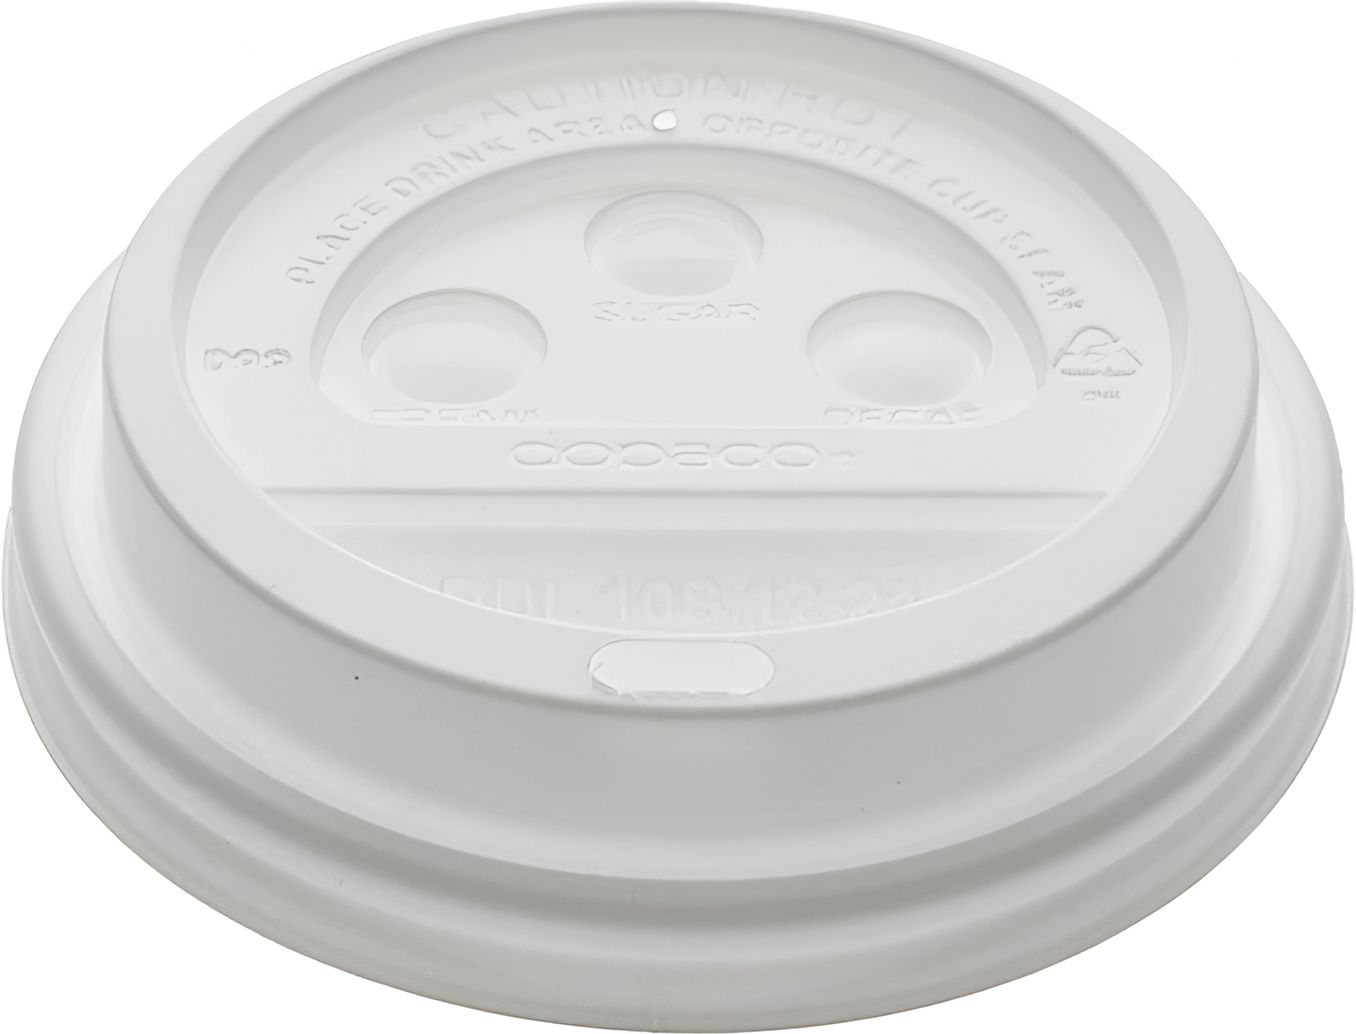 Pactiv Evergreen - White Dome Lid Fits For 4 Oz Hot Drink Cups, 1000/Cs - DDL4WD